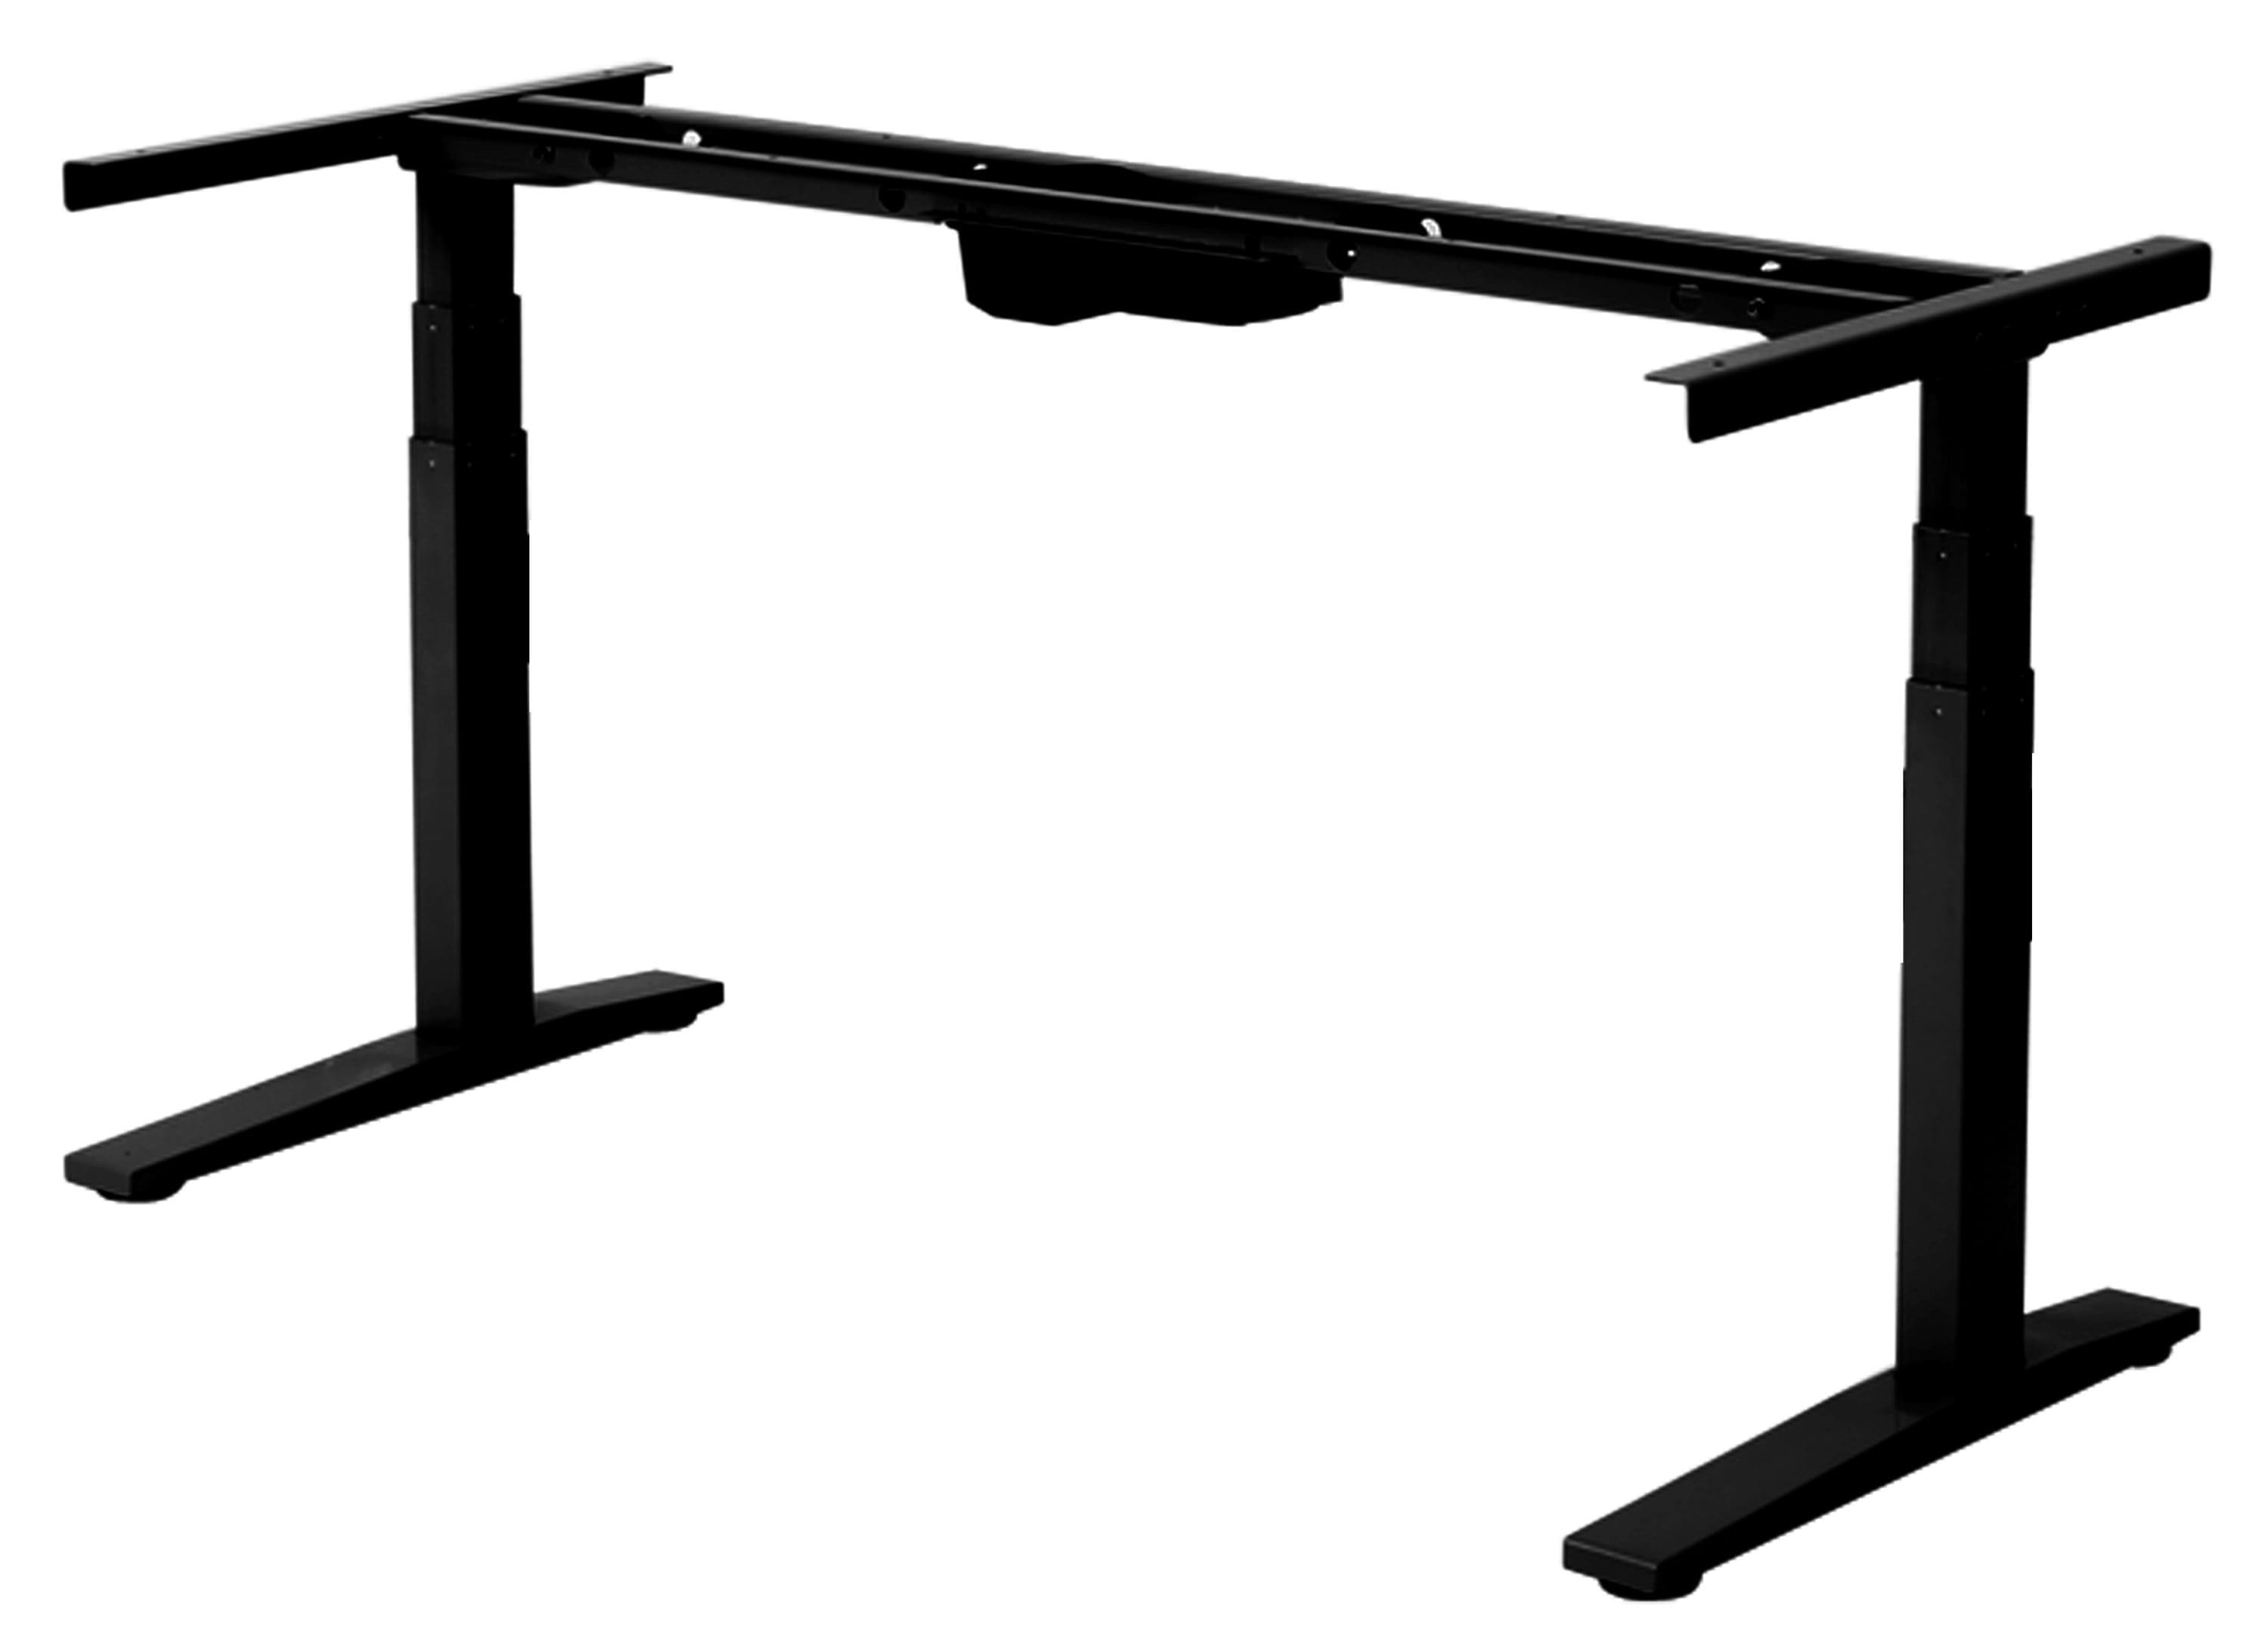 RISE UP electric standing desk height adjustable sit stand up computer –  UncagedErgonomics